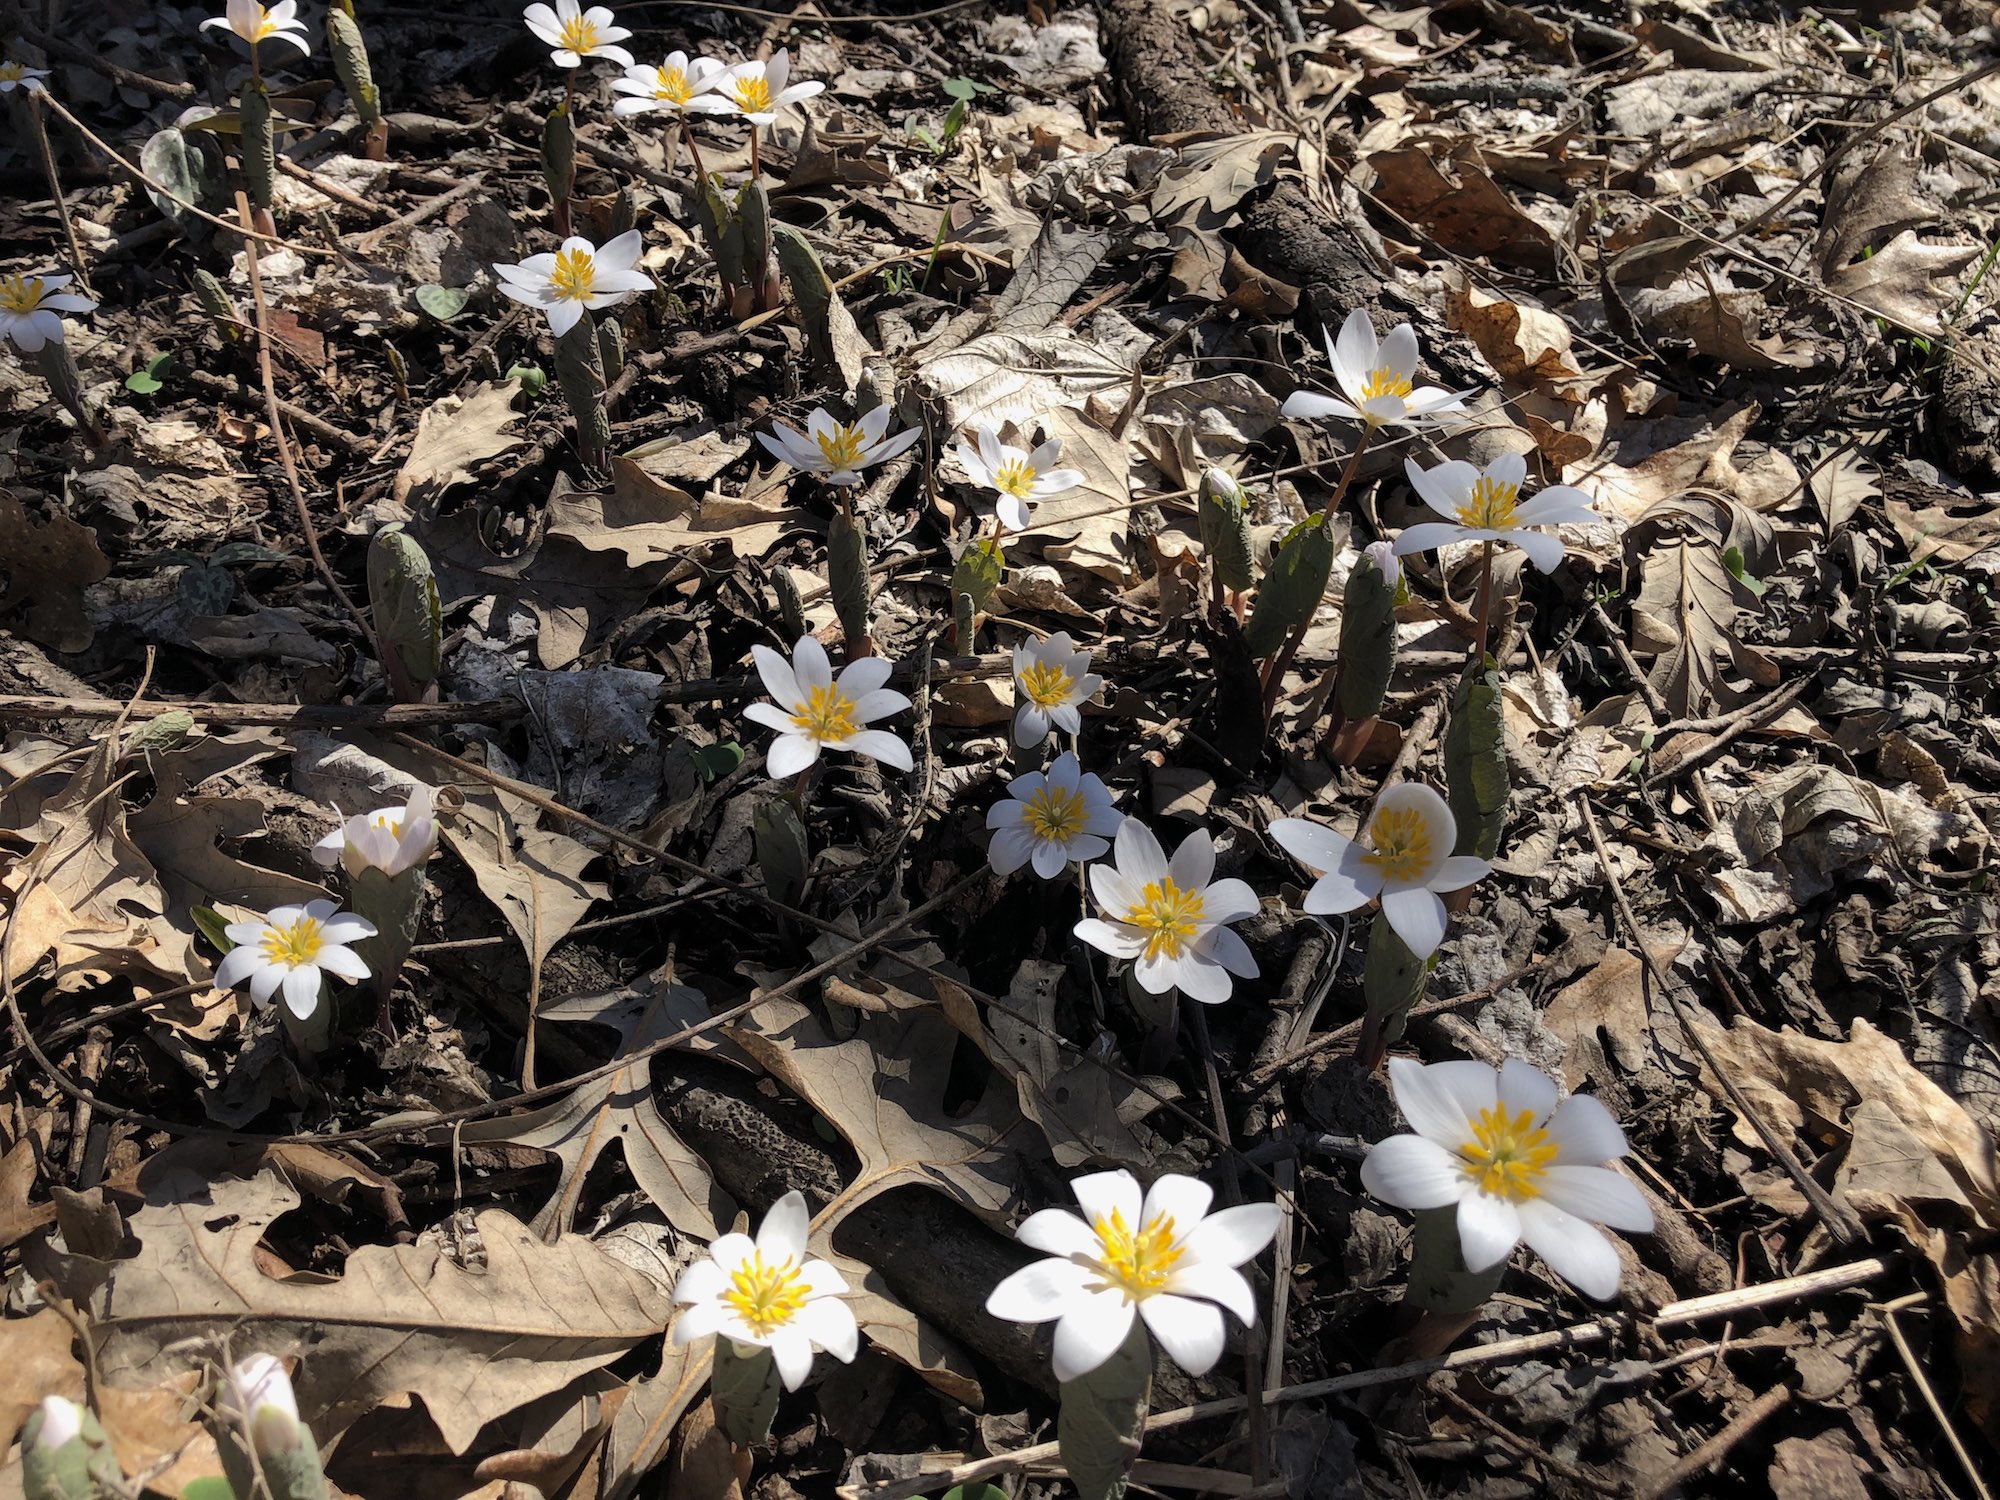 Bloodroot near Council Ring on April 8, 2019.